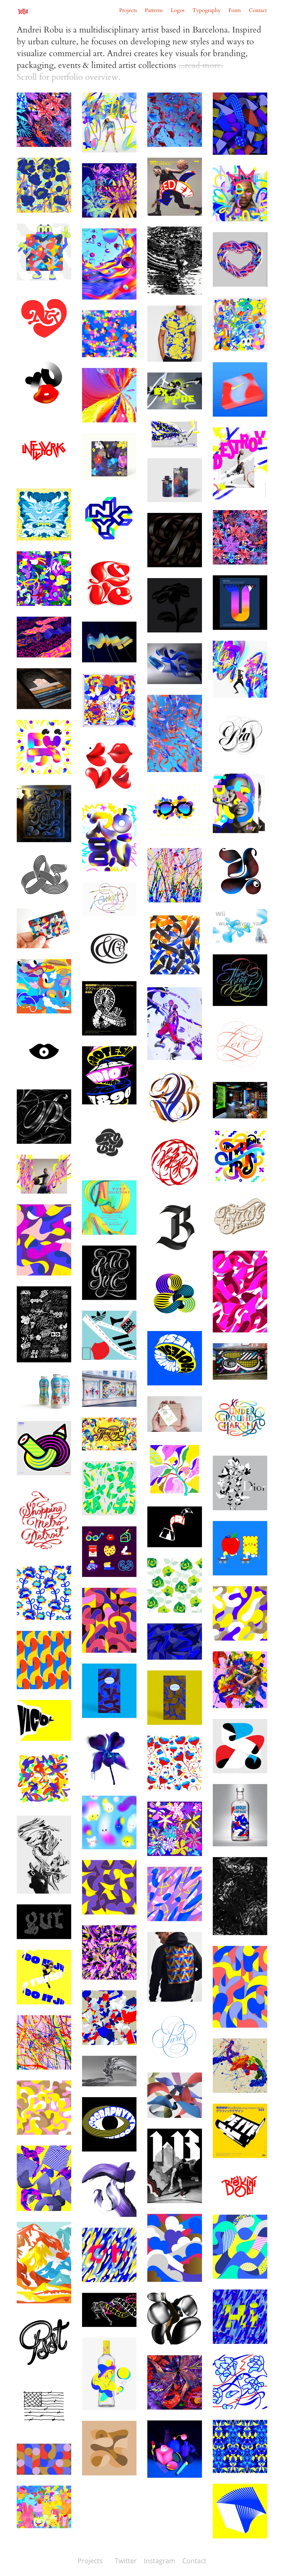 Andrei Robu Landing Page Example: Andrei Robu is a multidisciplinary artist based in Barcelona. Inspired by urban culture, he focuses on developing new styles and ways to visualize commercial art. Andrei creates key visuals for branding, packaging, events & limited artist collections.